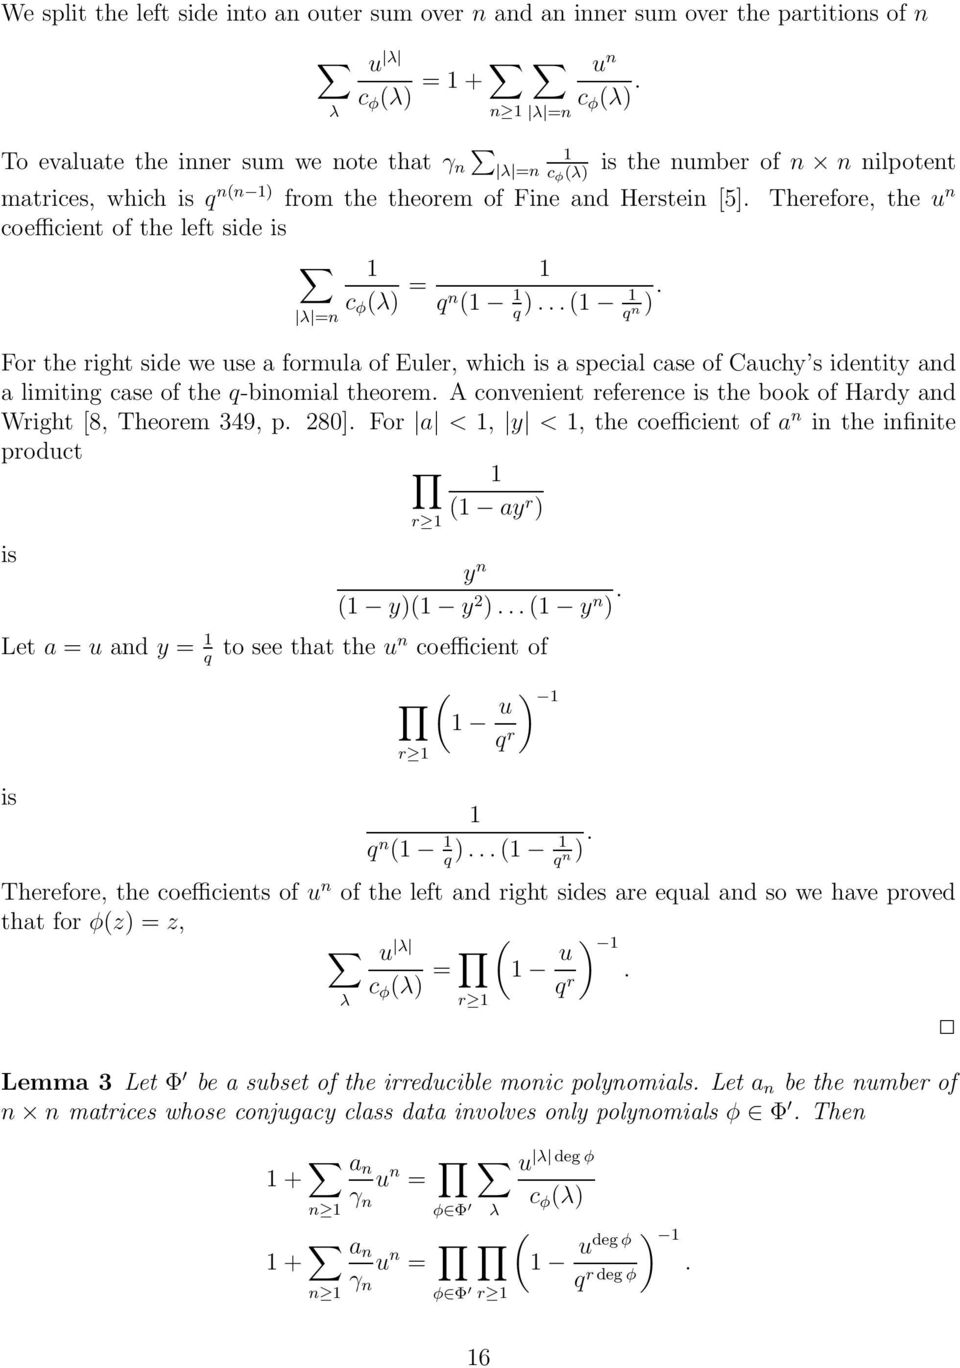 which is a special case of Cauchy s identity and a limiting case of the q-binomial theorem A convenient reference is the book of Hardy and Wright [8, Theorem 349, p 280] For a <, y <, the coefficient